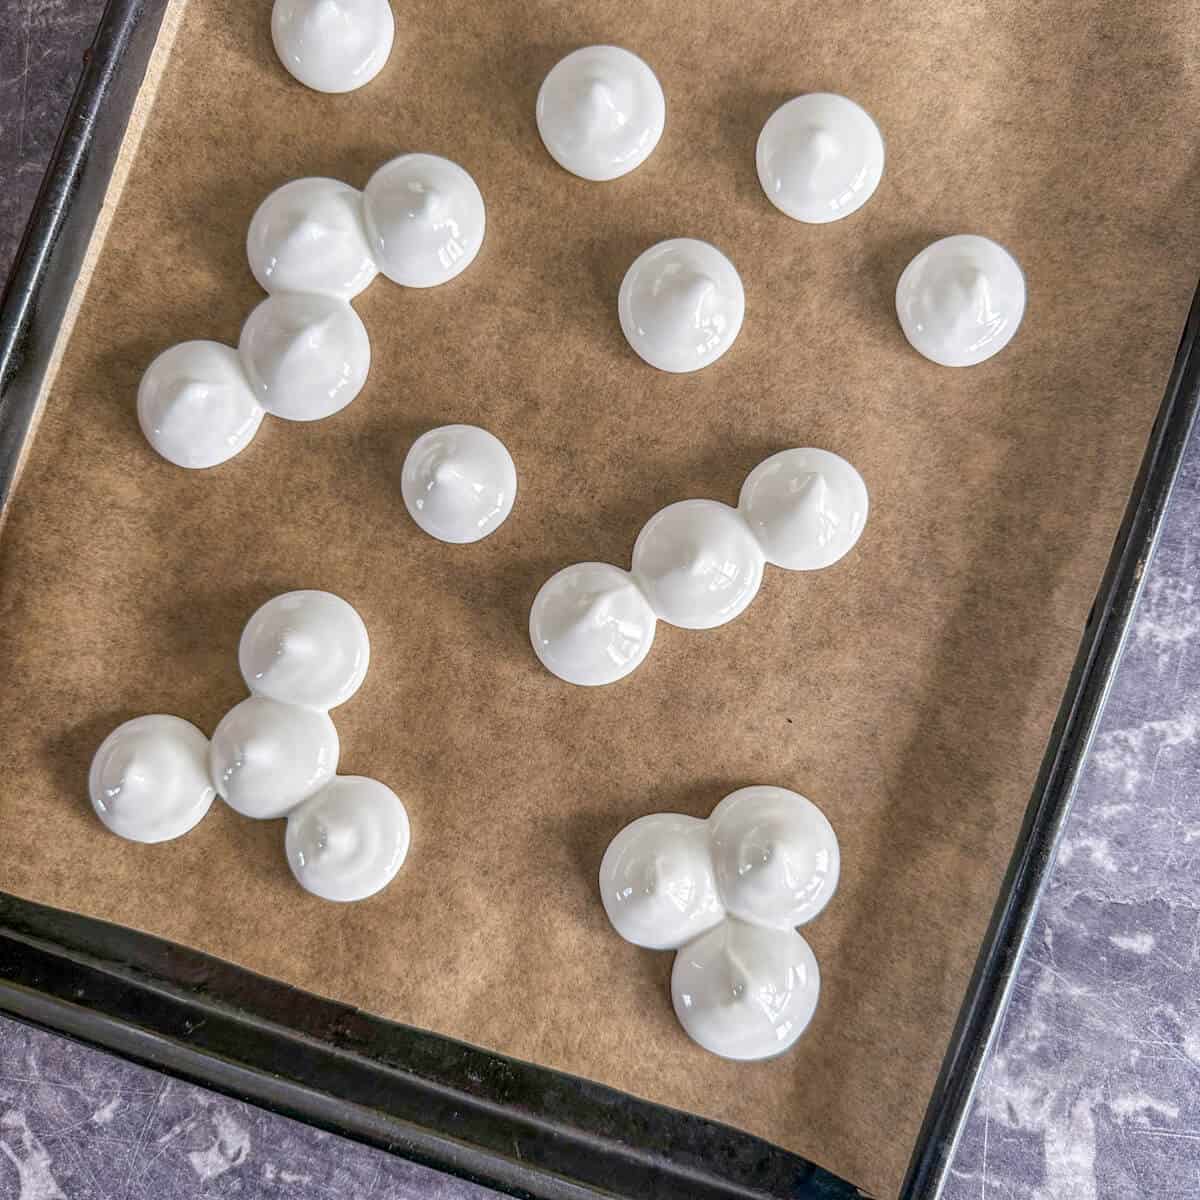 A baking tray with several piped mounds of raw meringue on it. 